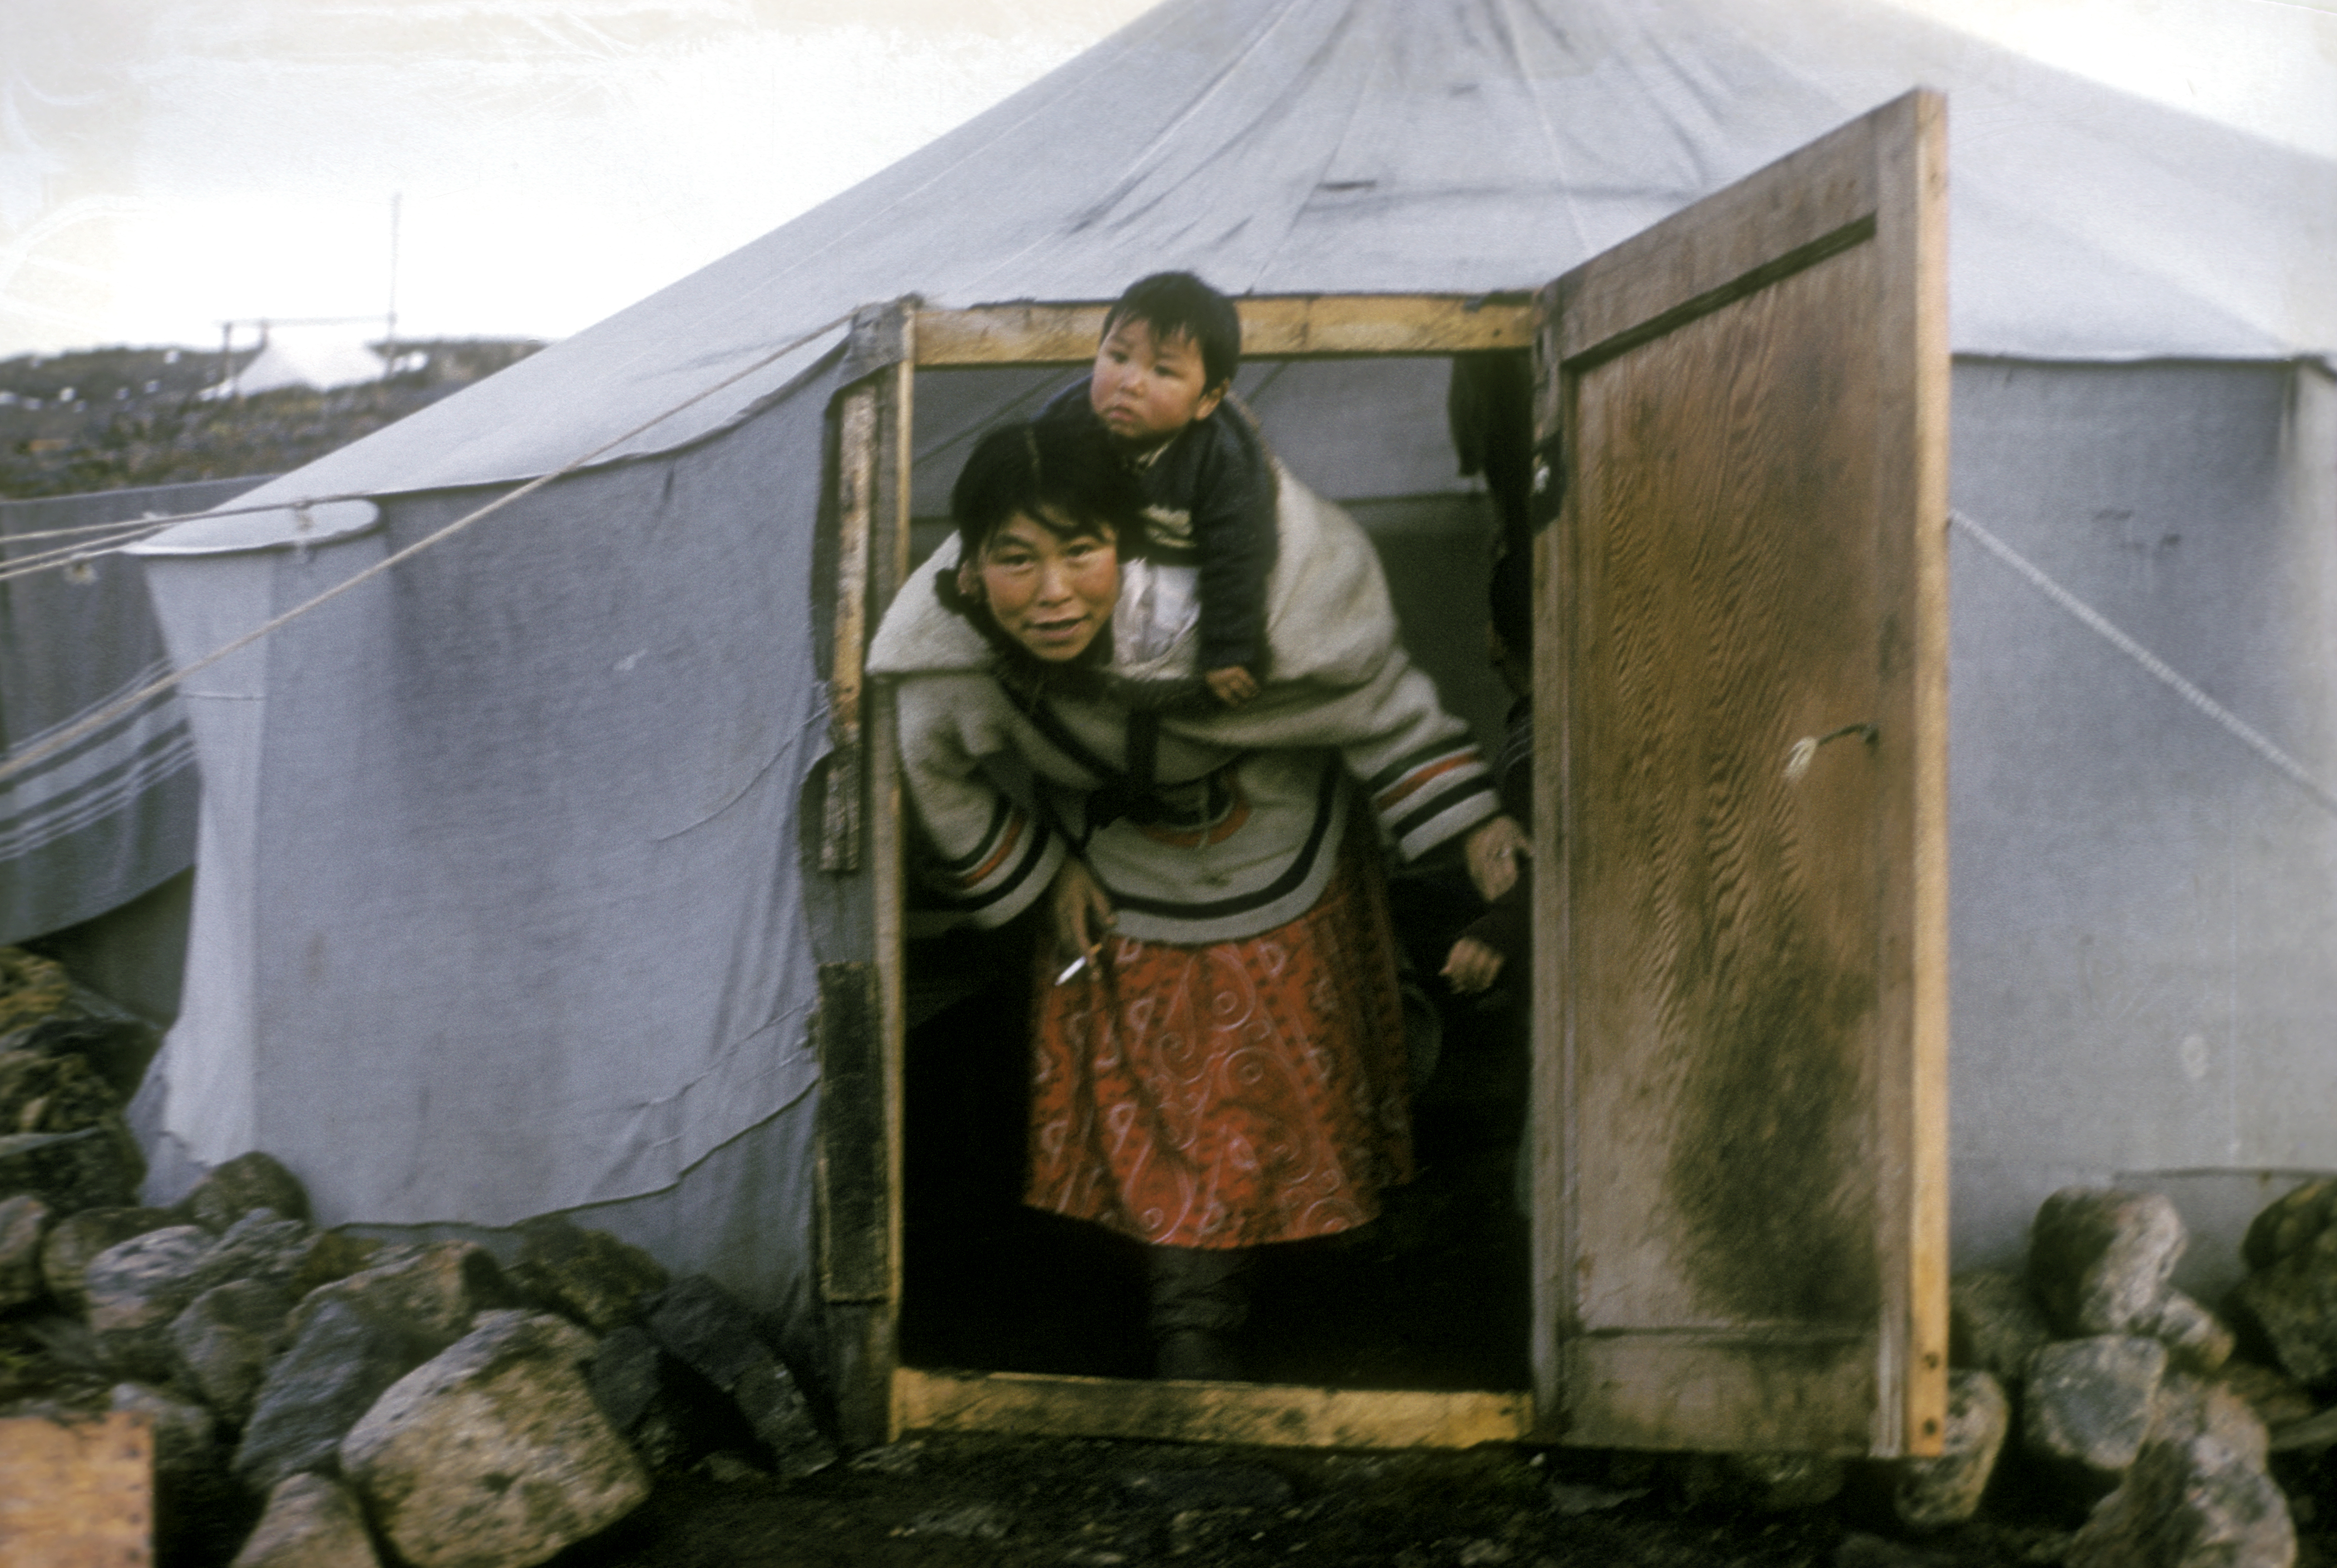 Kenojuak Ashevak, exits her tent with her son, Adamie Ashevak (Inuit), Cape Dorset, 1960. (Rosemary Eaton) © Libraries and Archives Canada